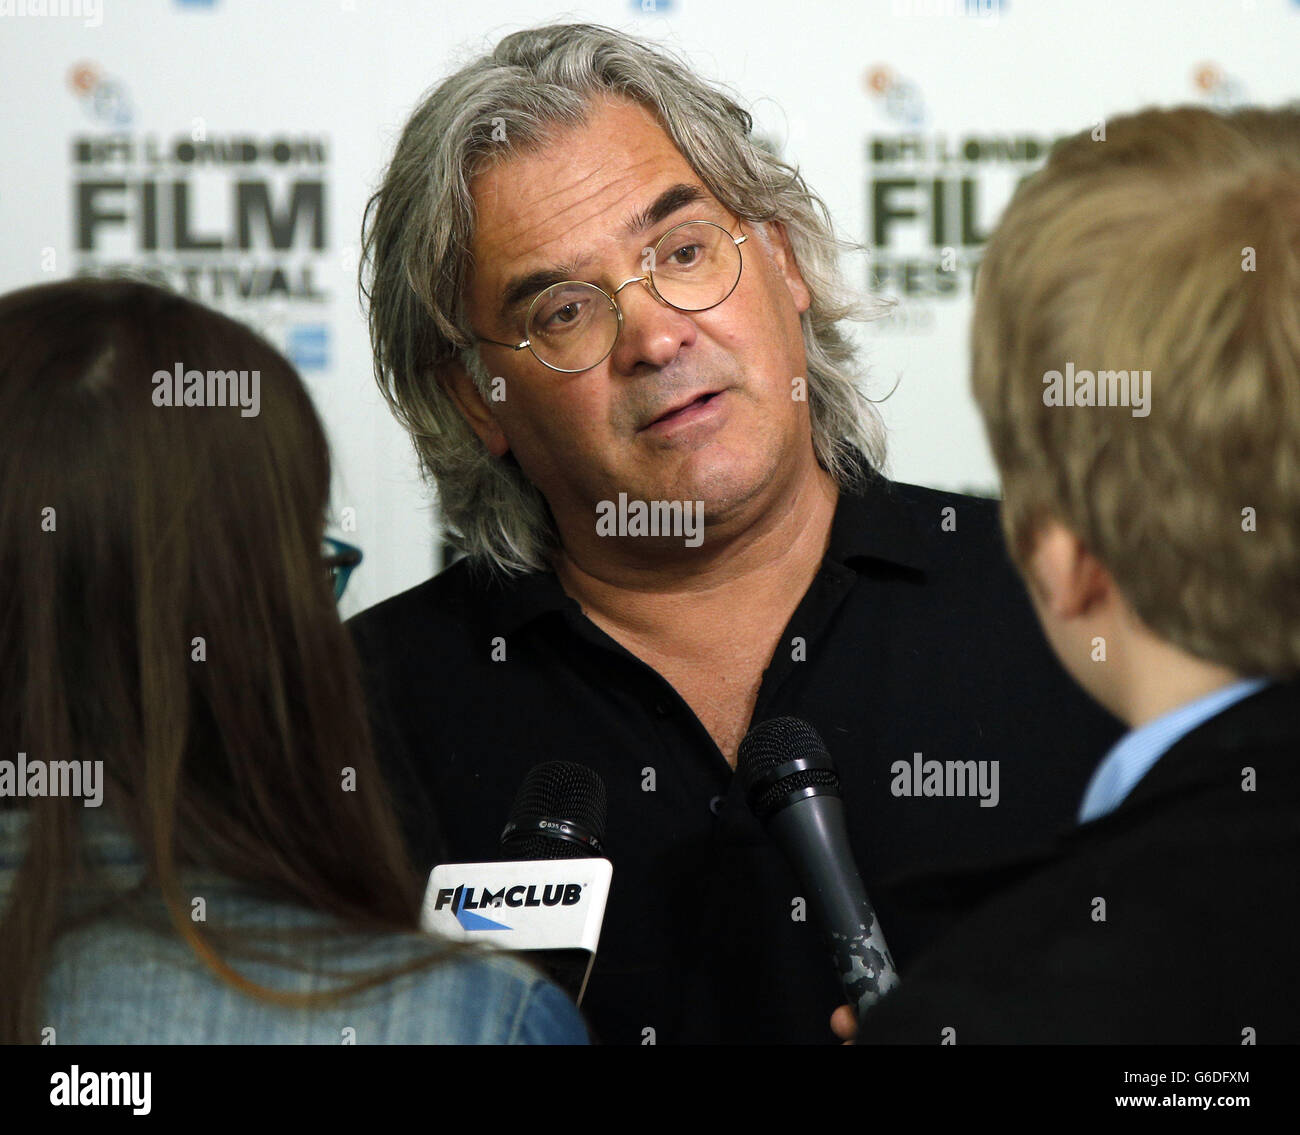 Director Paul Greengrass speaks to the press at a photocall at the Odeon Cinema, Leicester Square, London as part of a launch event for the 57th BFI London Film Festival. Stock Photo